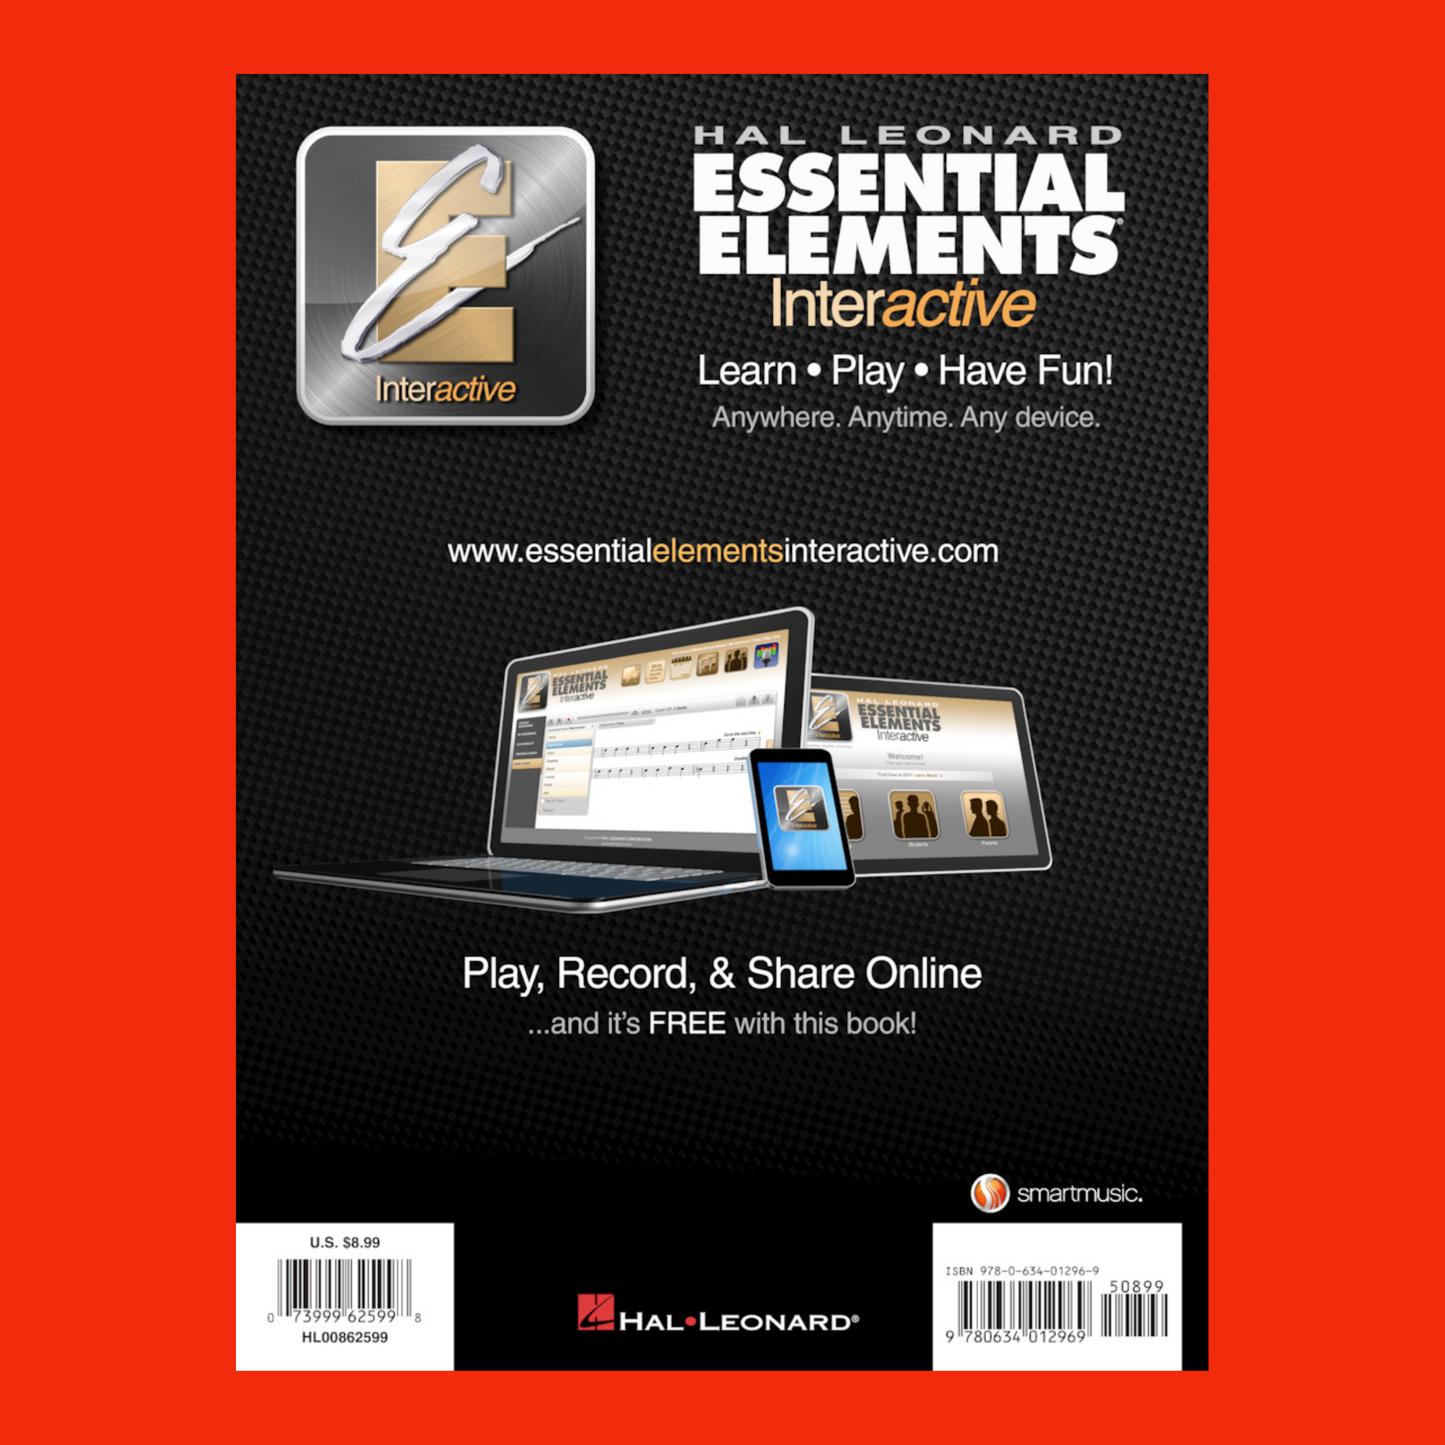 Essential Elements For Band - Trombone Book 2 (Book & EEi)